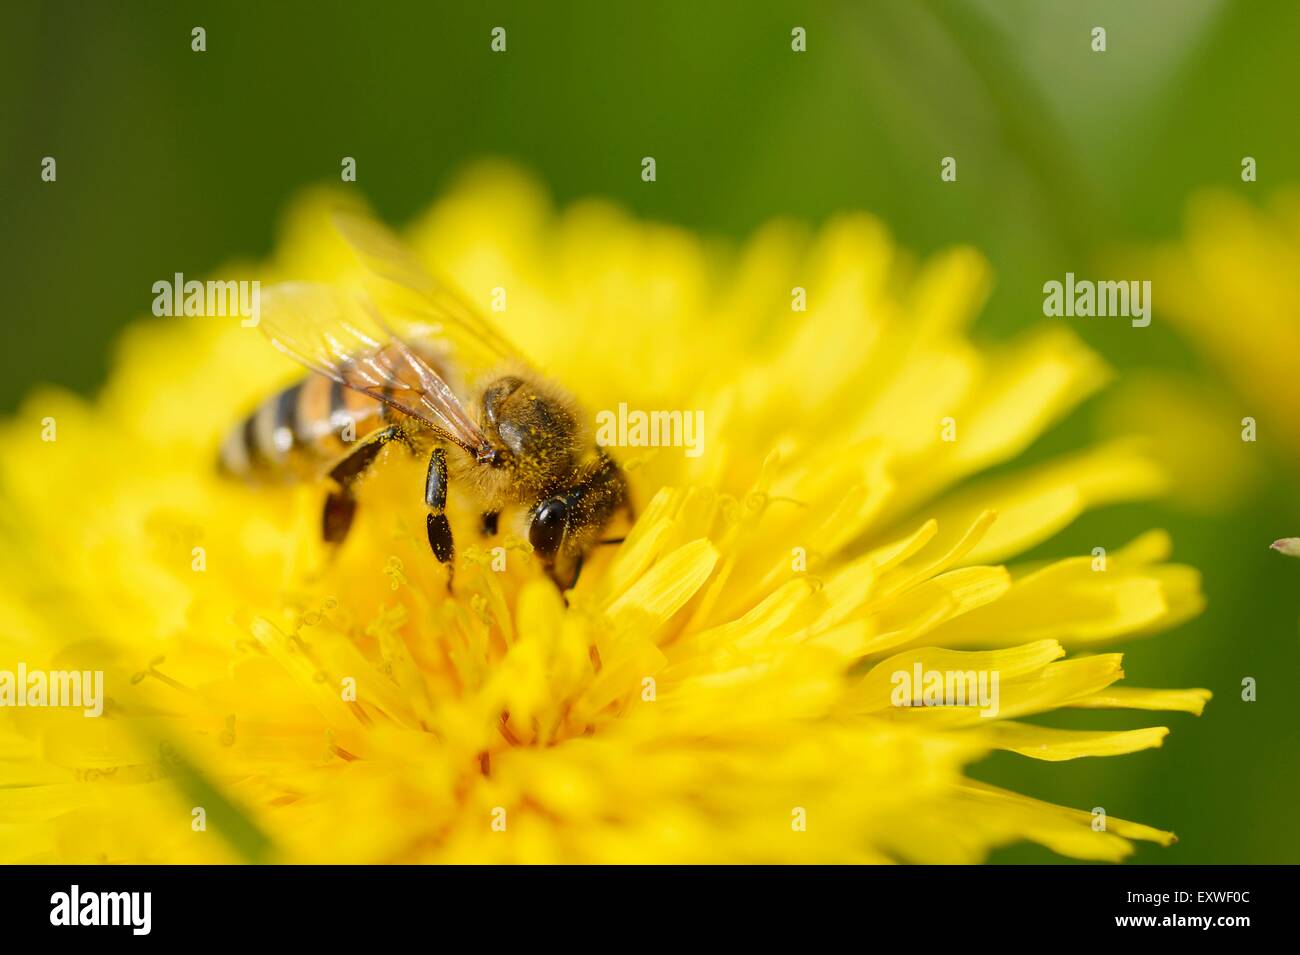 Close-up of a honey bee on a dandelion blossom Stock Photo